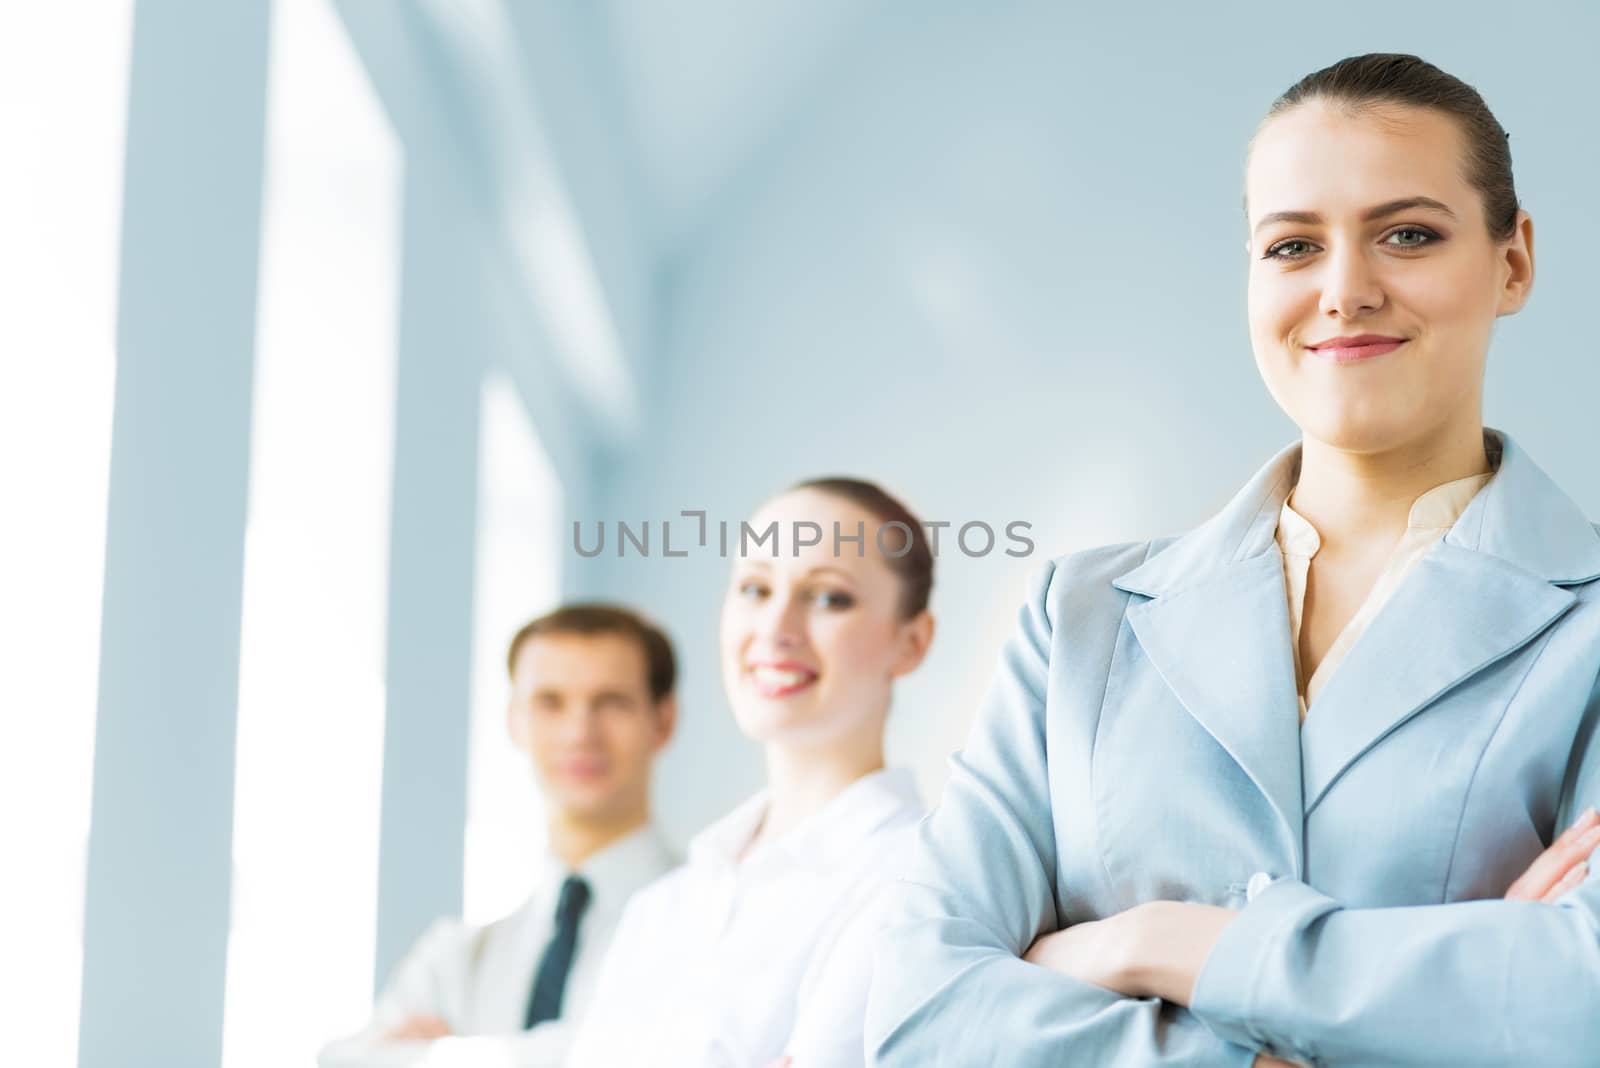 successful businessmen, a portrait of a business woman standing next to colleagues